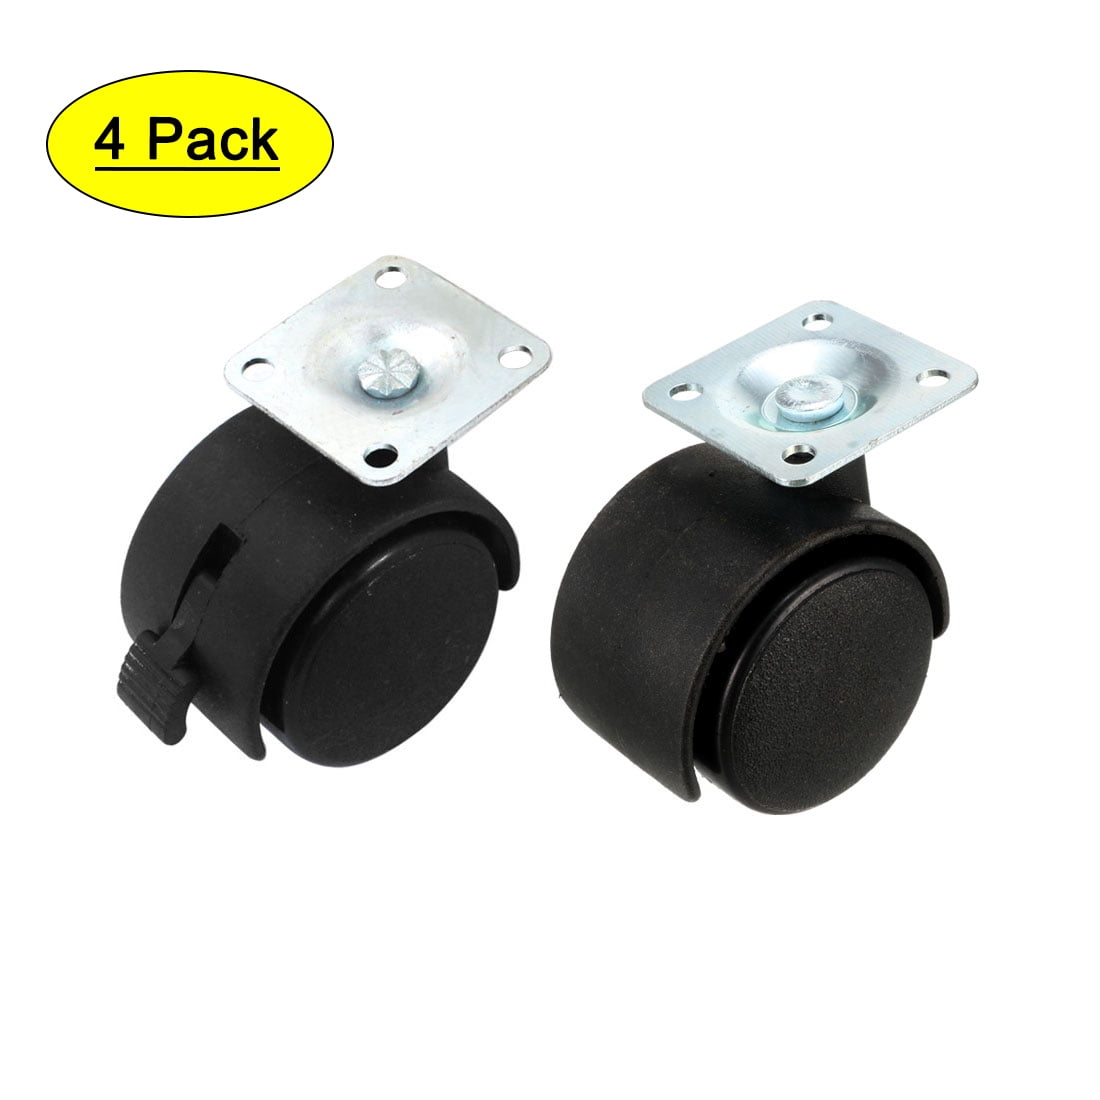 4/pk 1.5" furniture swivel casters wheels w/1.5x1.5 plate+brake replacement part 